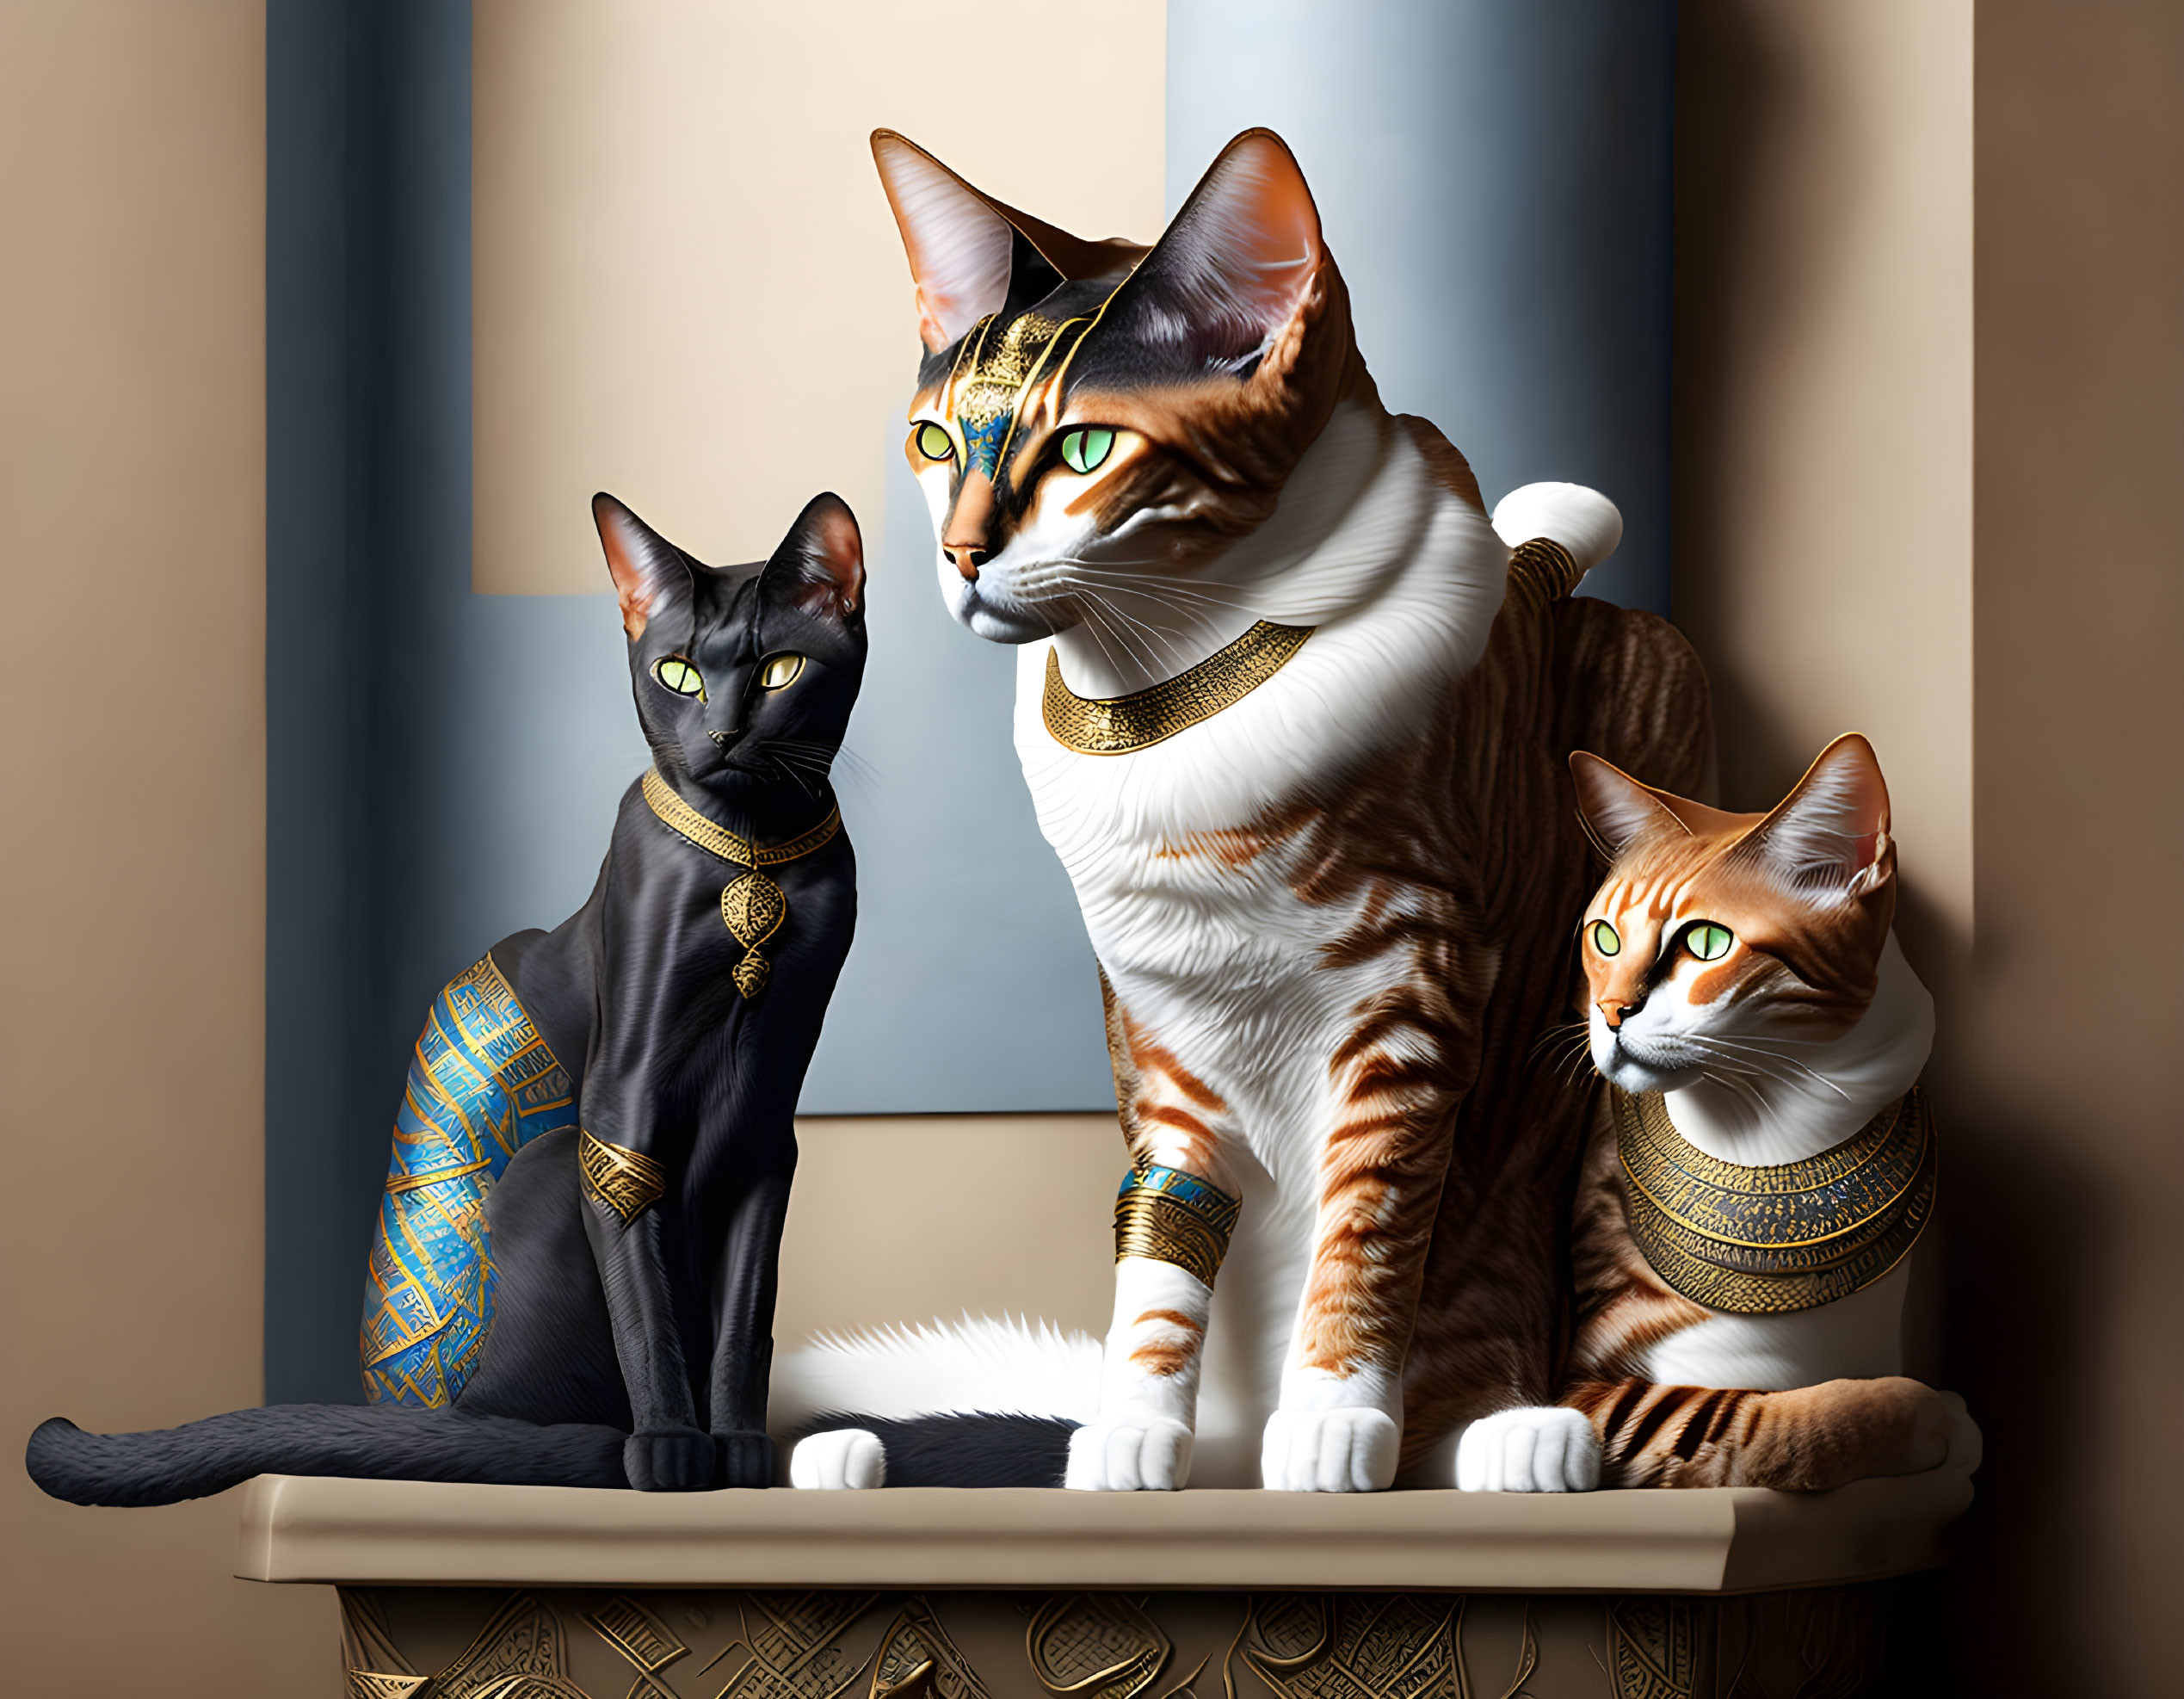 Three cats depicted as ancient Egyptian royalty with gold and blue accessories, posing on a pedestal